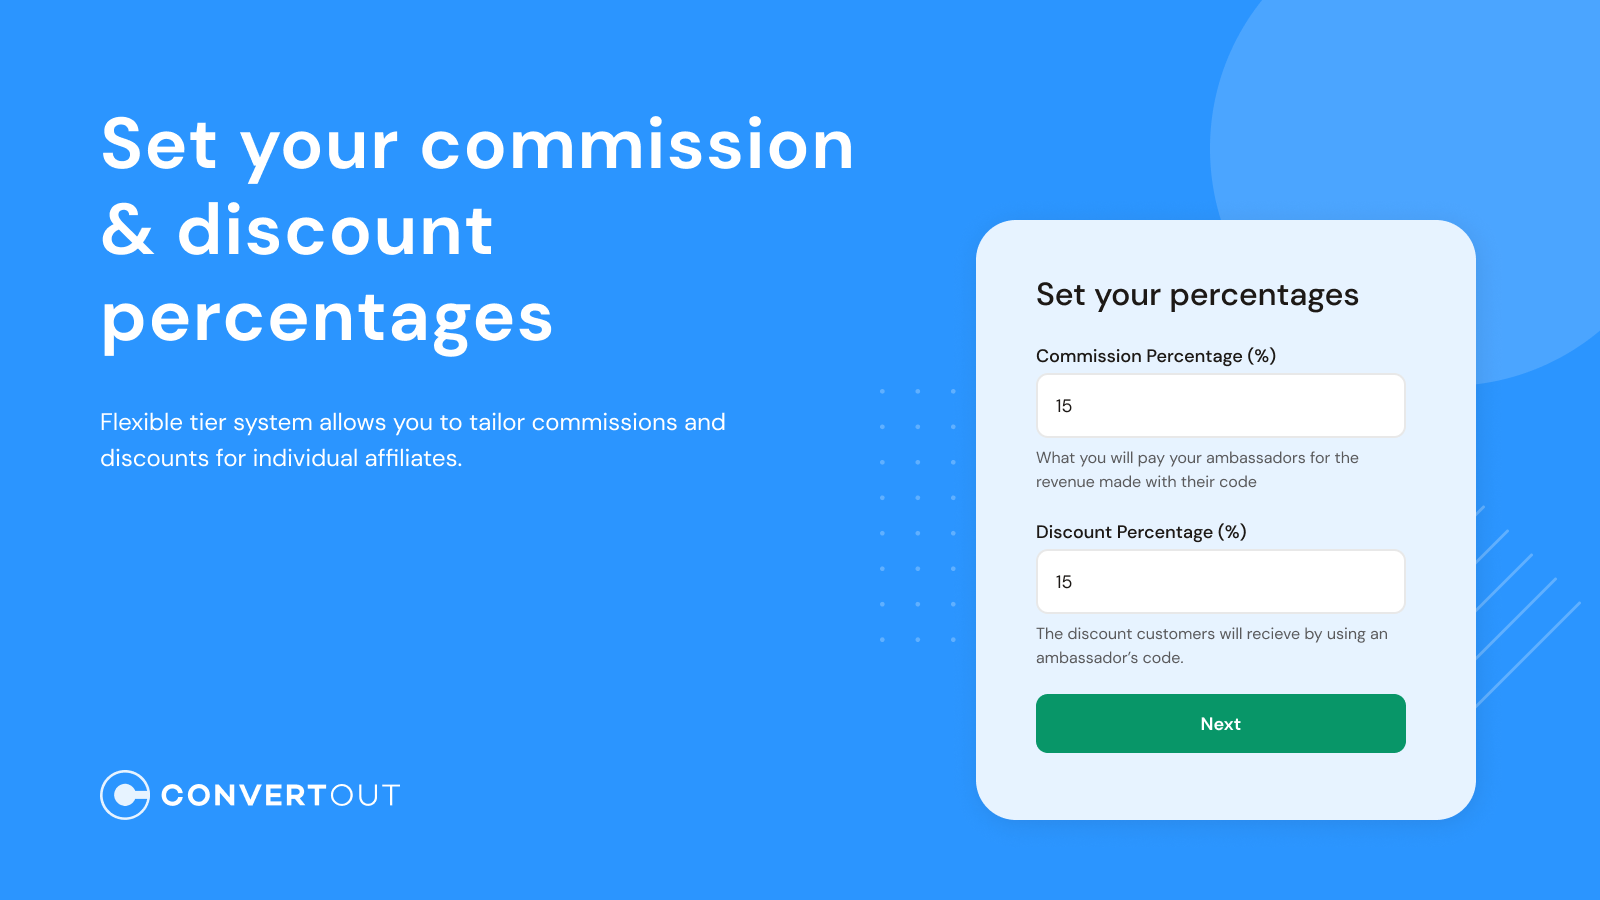 Set your own commission and discount percentages